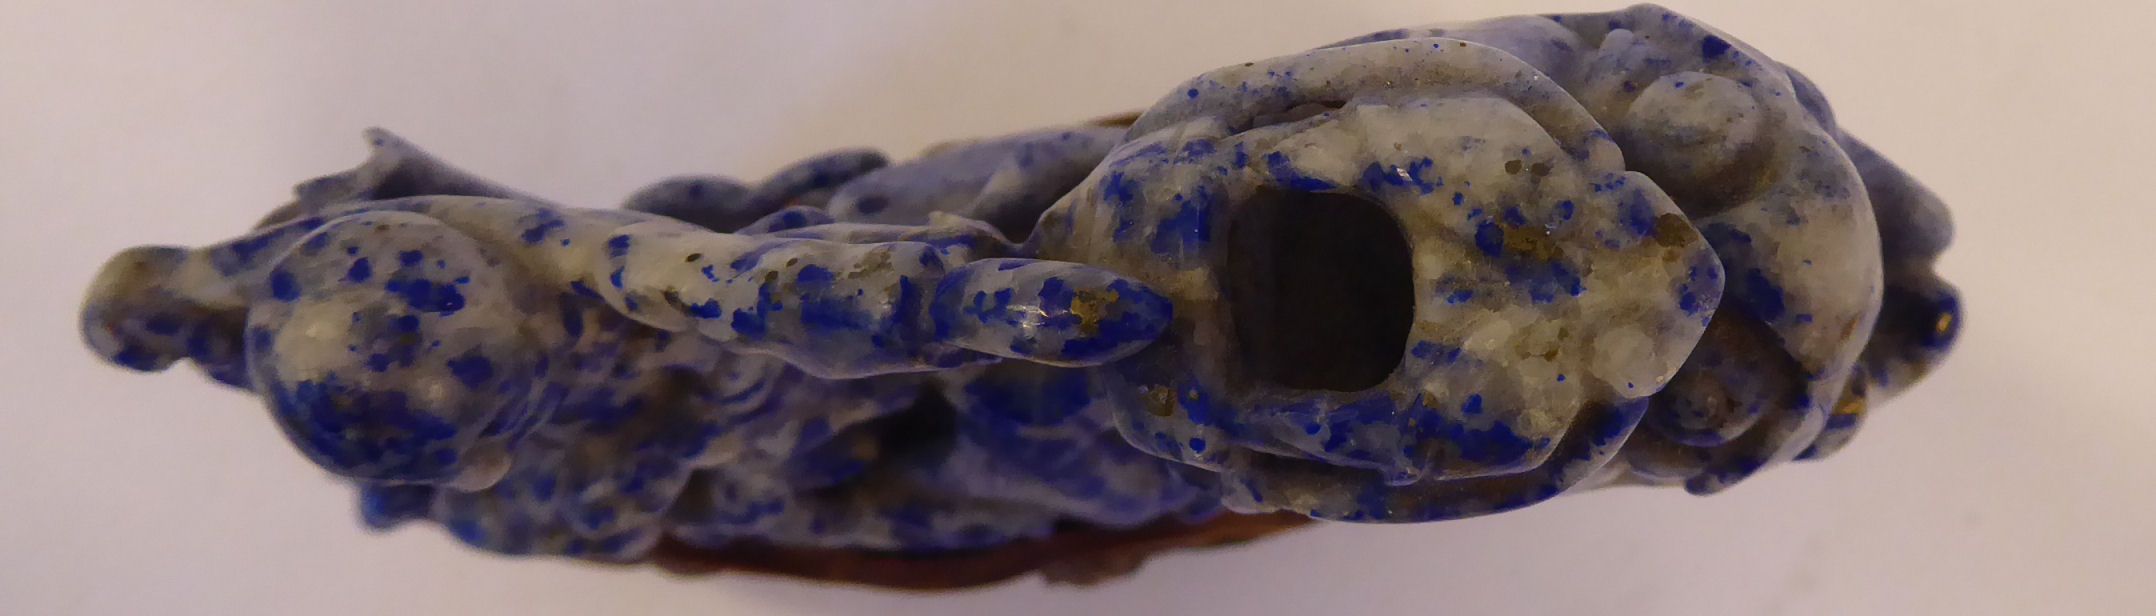 A Chinese carved lapis lazuli model, a dragon-fish emerging from cresting waves, - Image 6 of 8